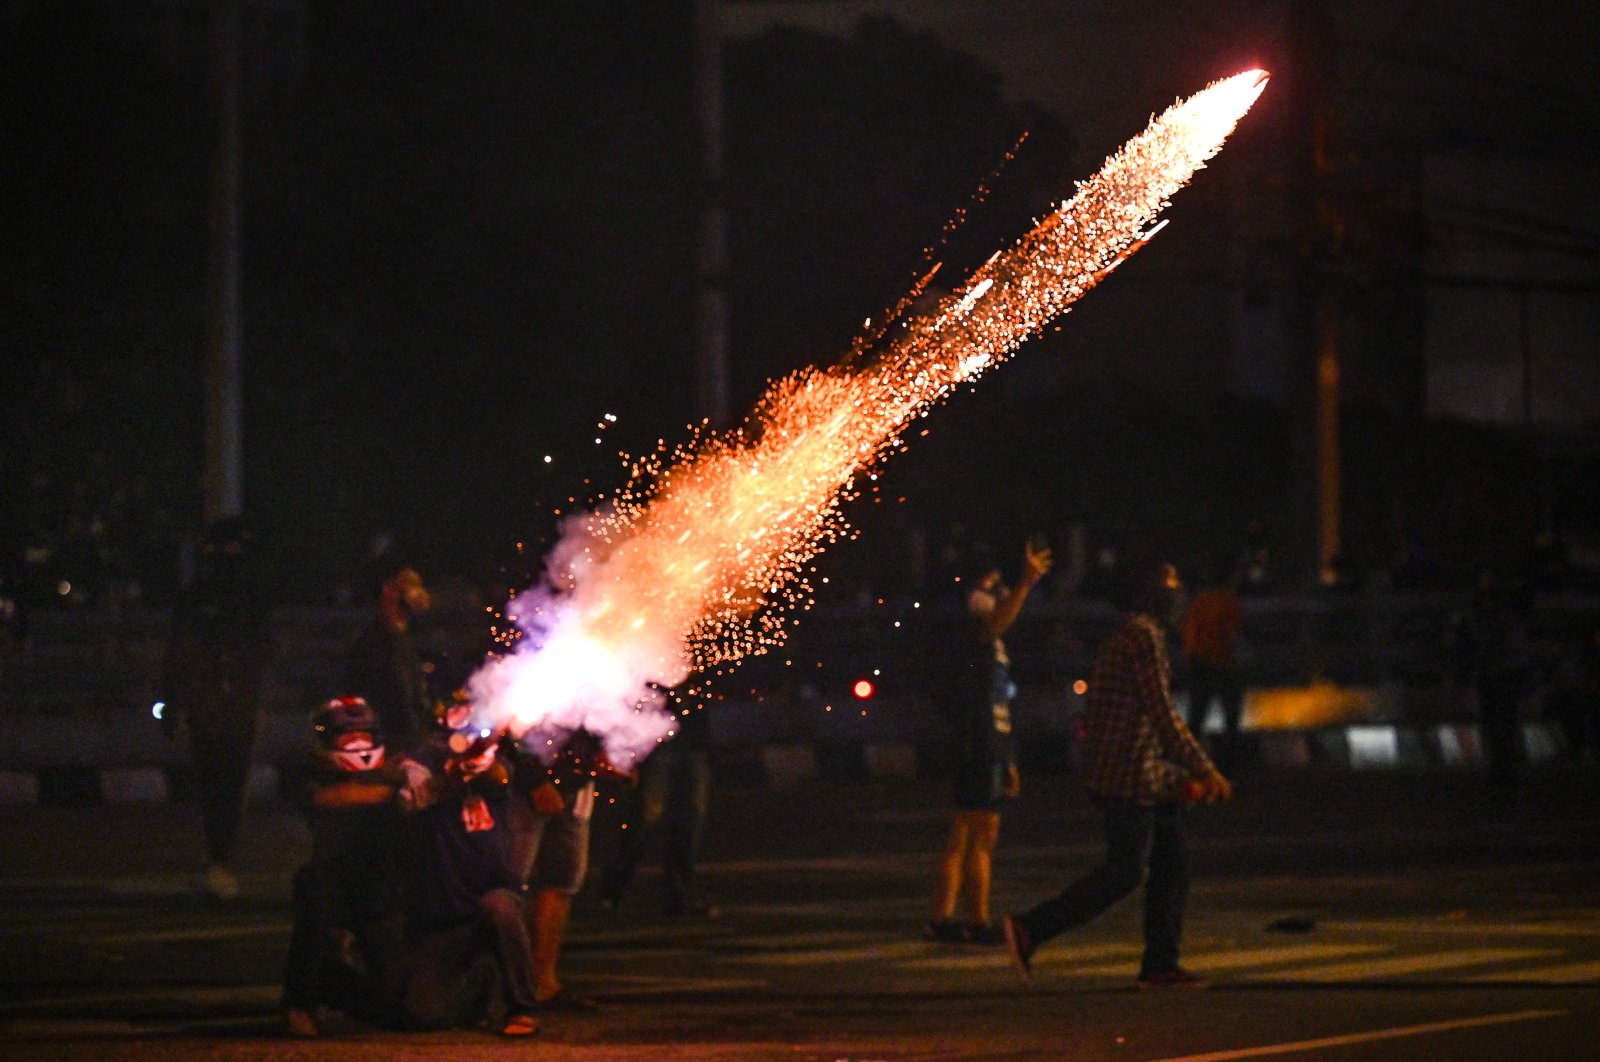 Protesters set off fireworks as they take part in a demonstration in Bangkok on Aug. 15, 2021, calling for the resignation of Thailand's Prime Minister Prayut Chan-Ocha over the government's handling of the COVID-19 crisis. (AFP Photo)